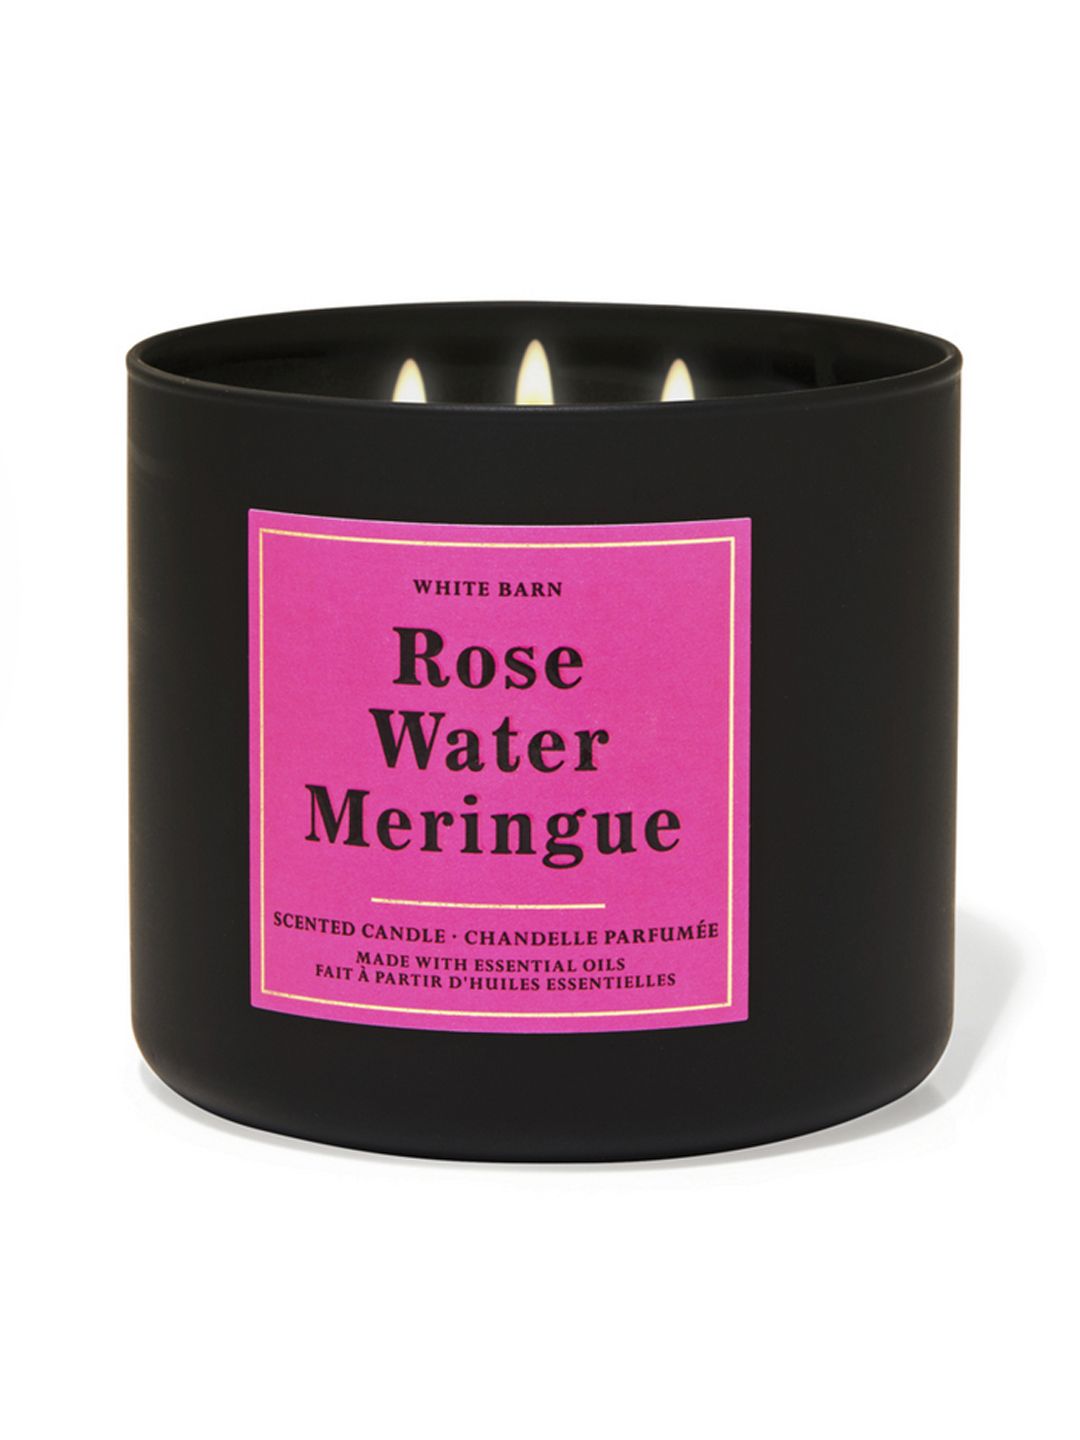 Bath & Body Works Rose Water Meringue 3-Wick Scented Candle - 411g Price in India